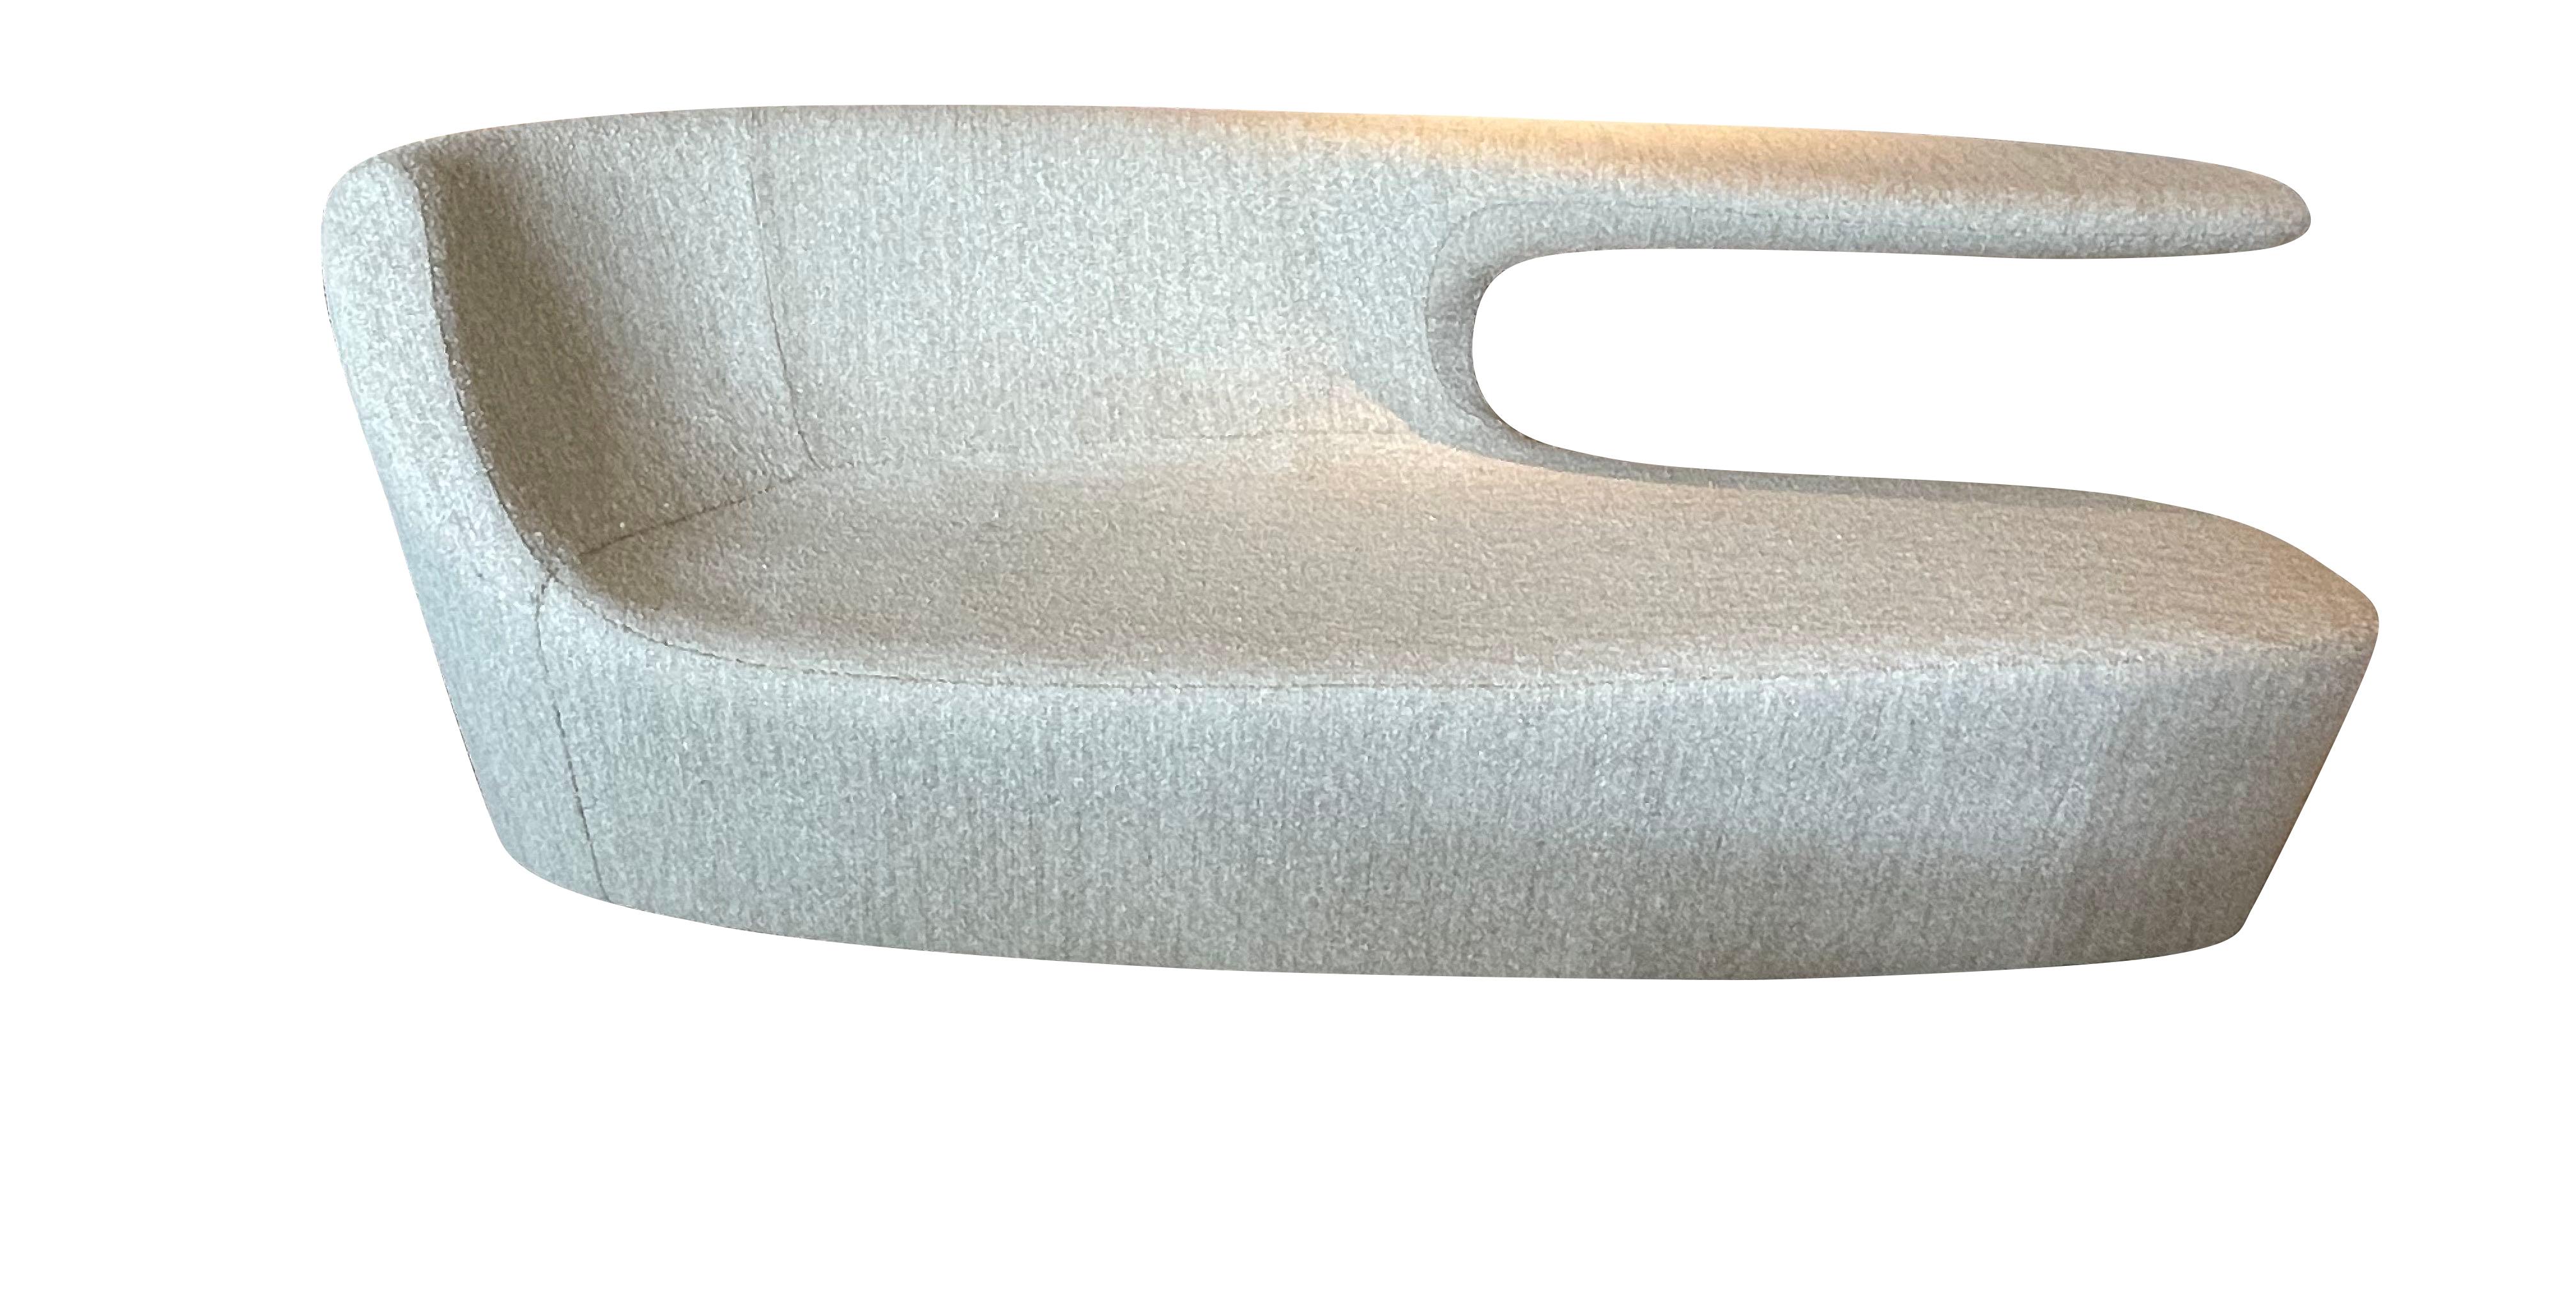 Late 20th Century Curved Sculptural Sofa, Spanish, 1980s For Sale